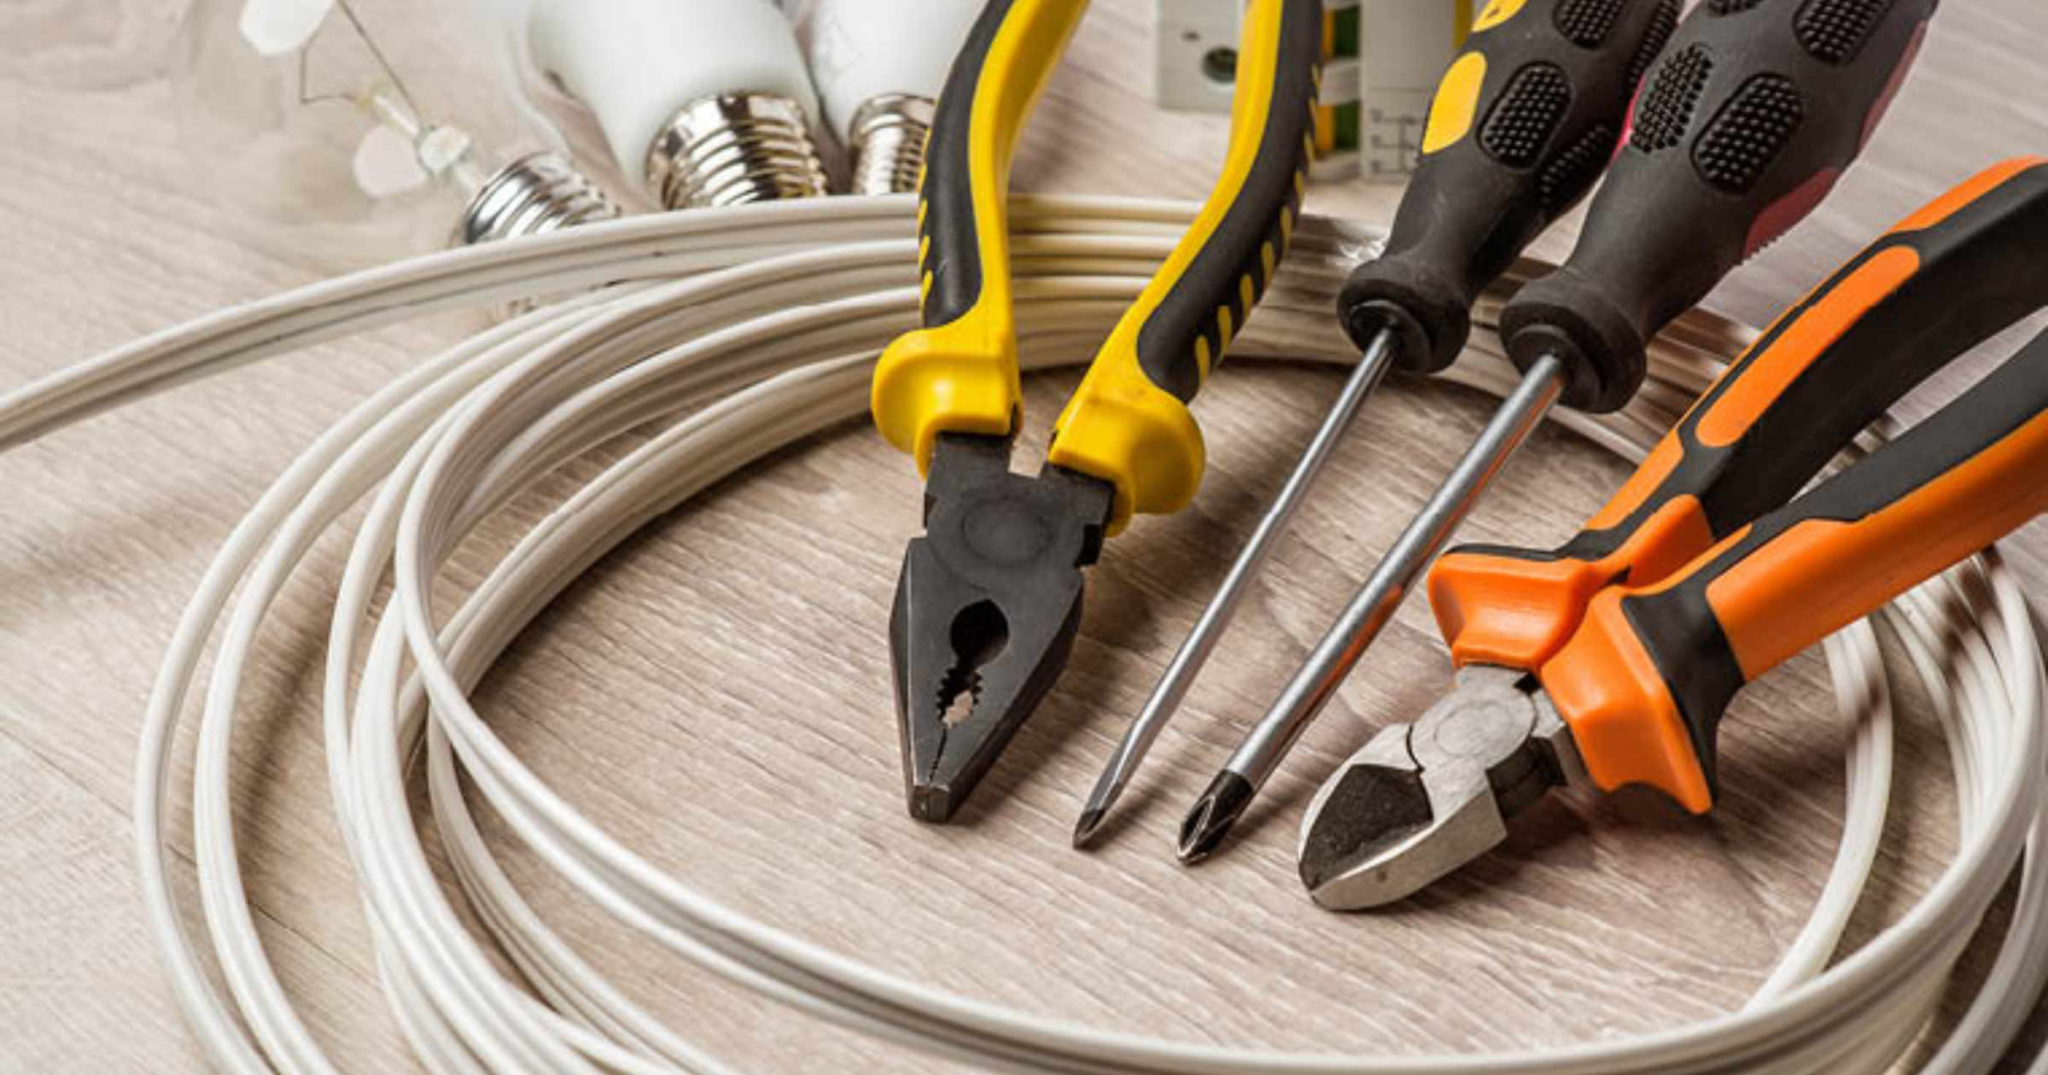 The Importance Of Having Electrical Contractors For Your Home Needs